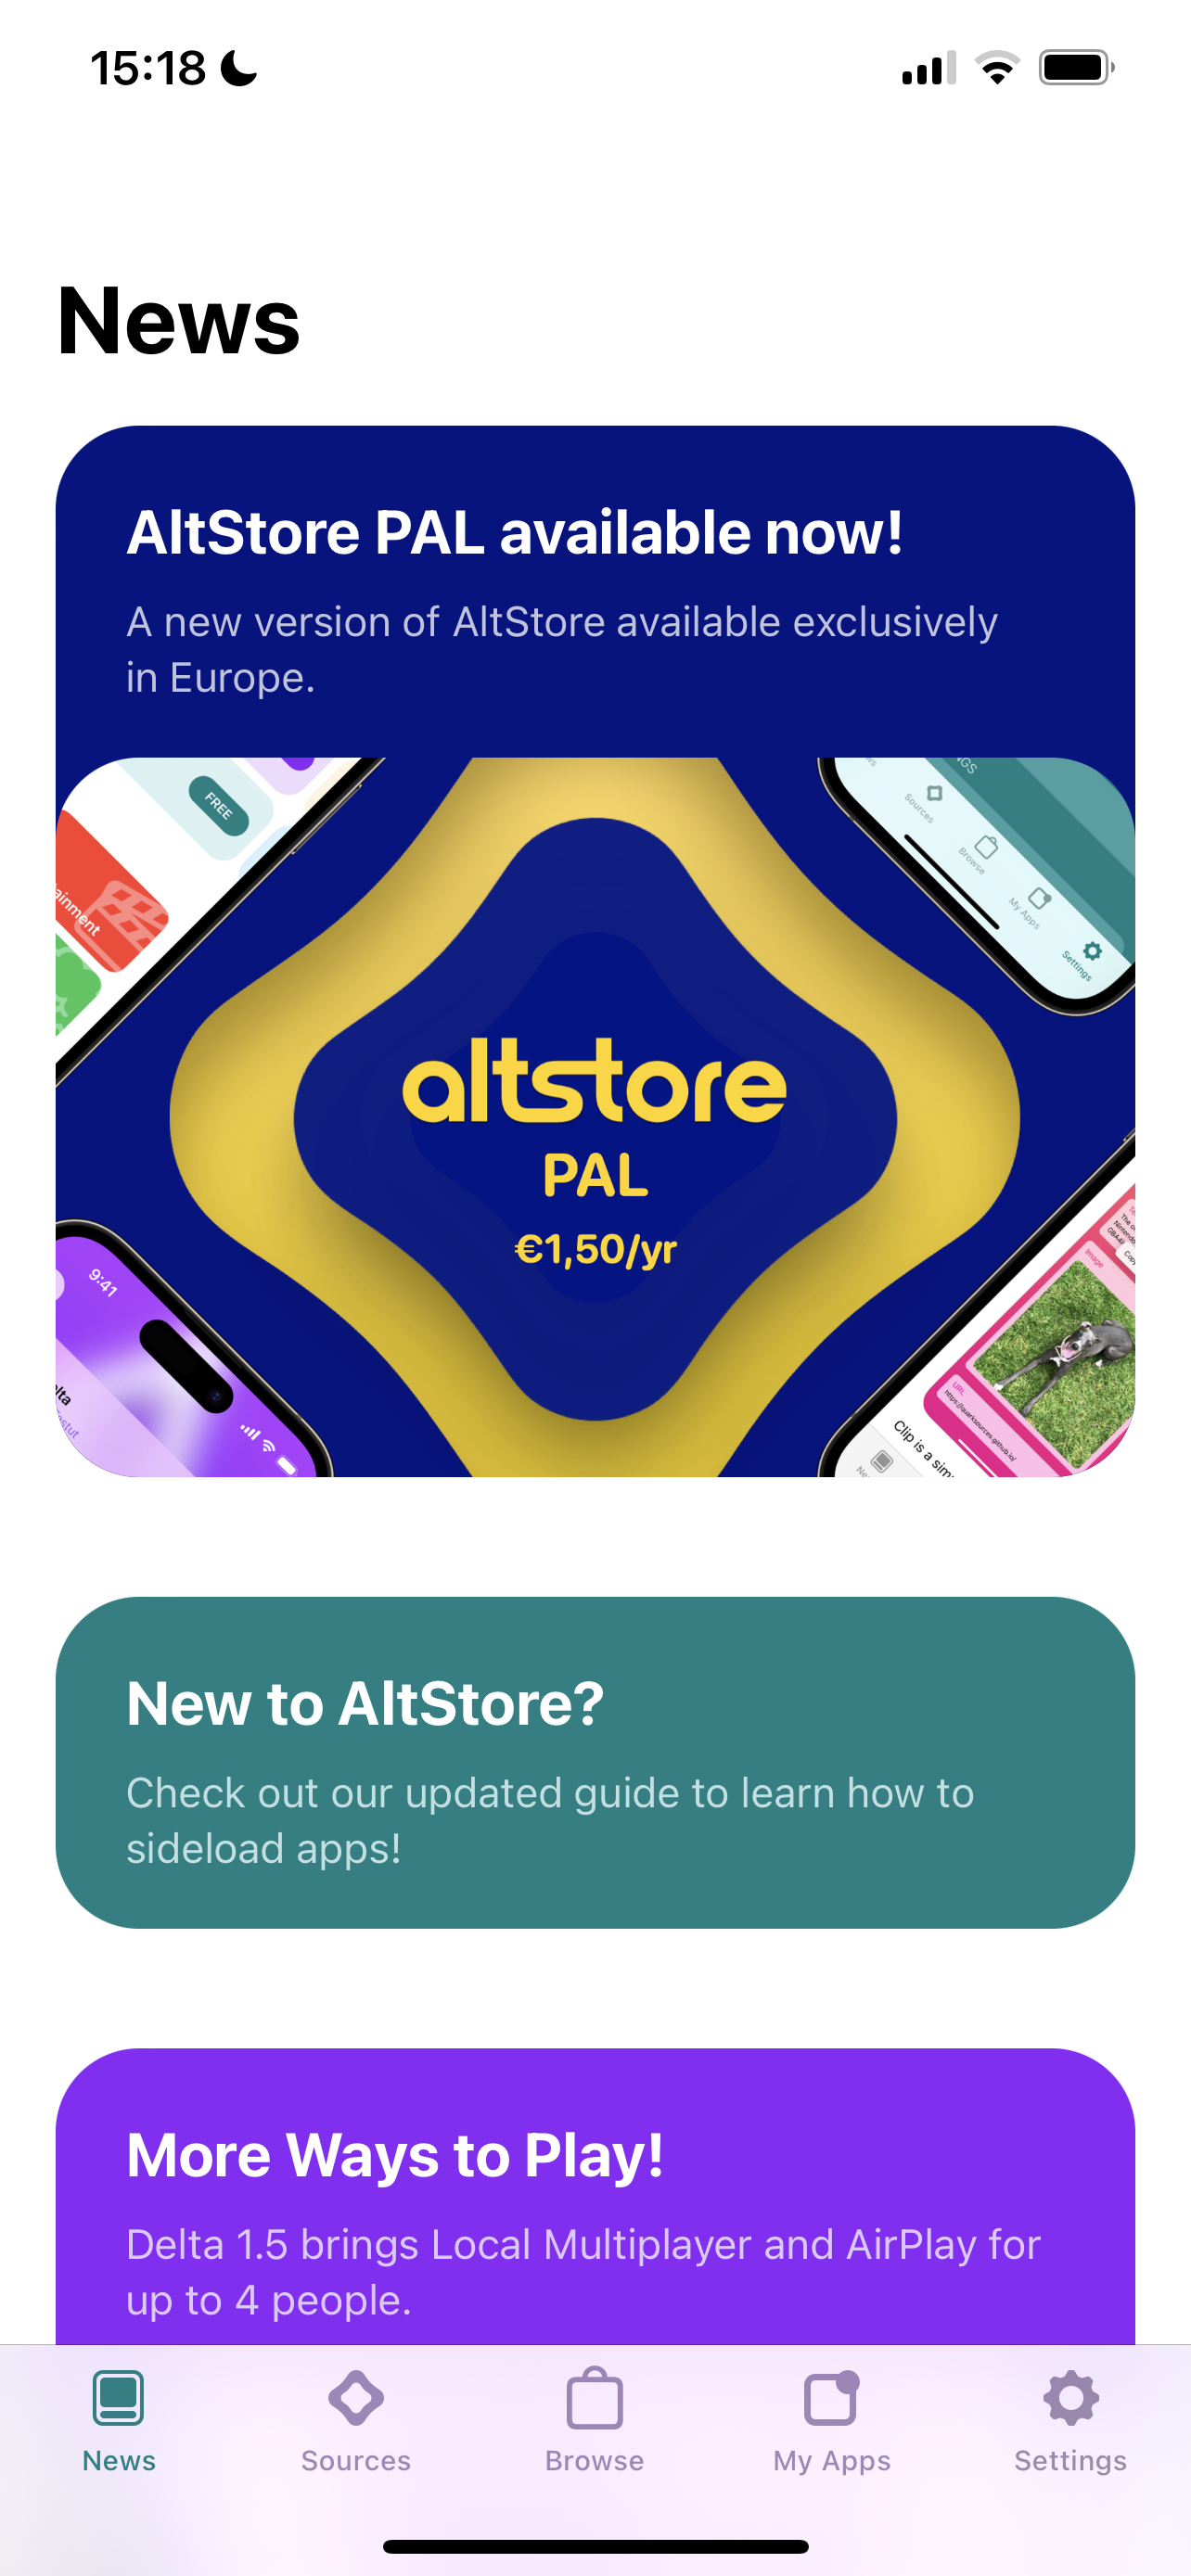 Attached: 4 images  🥳 AltStore PAL, the first alternative app marketplace on iPhone, is available now in the EU for a nominal <€2/yr subscript